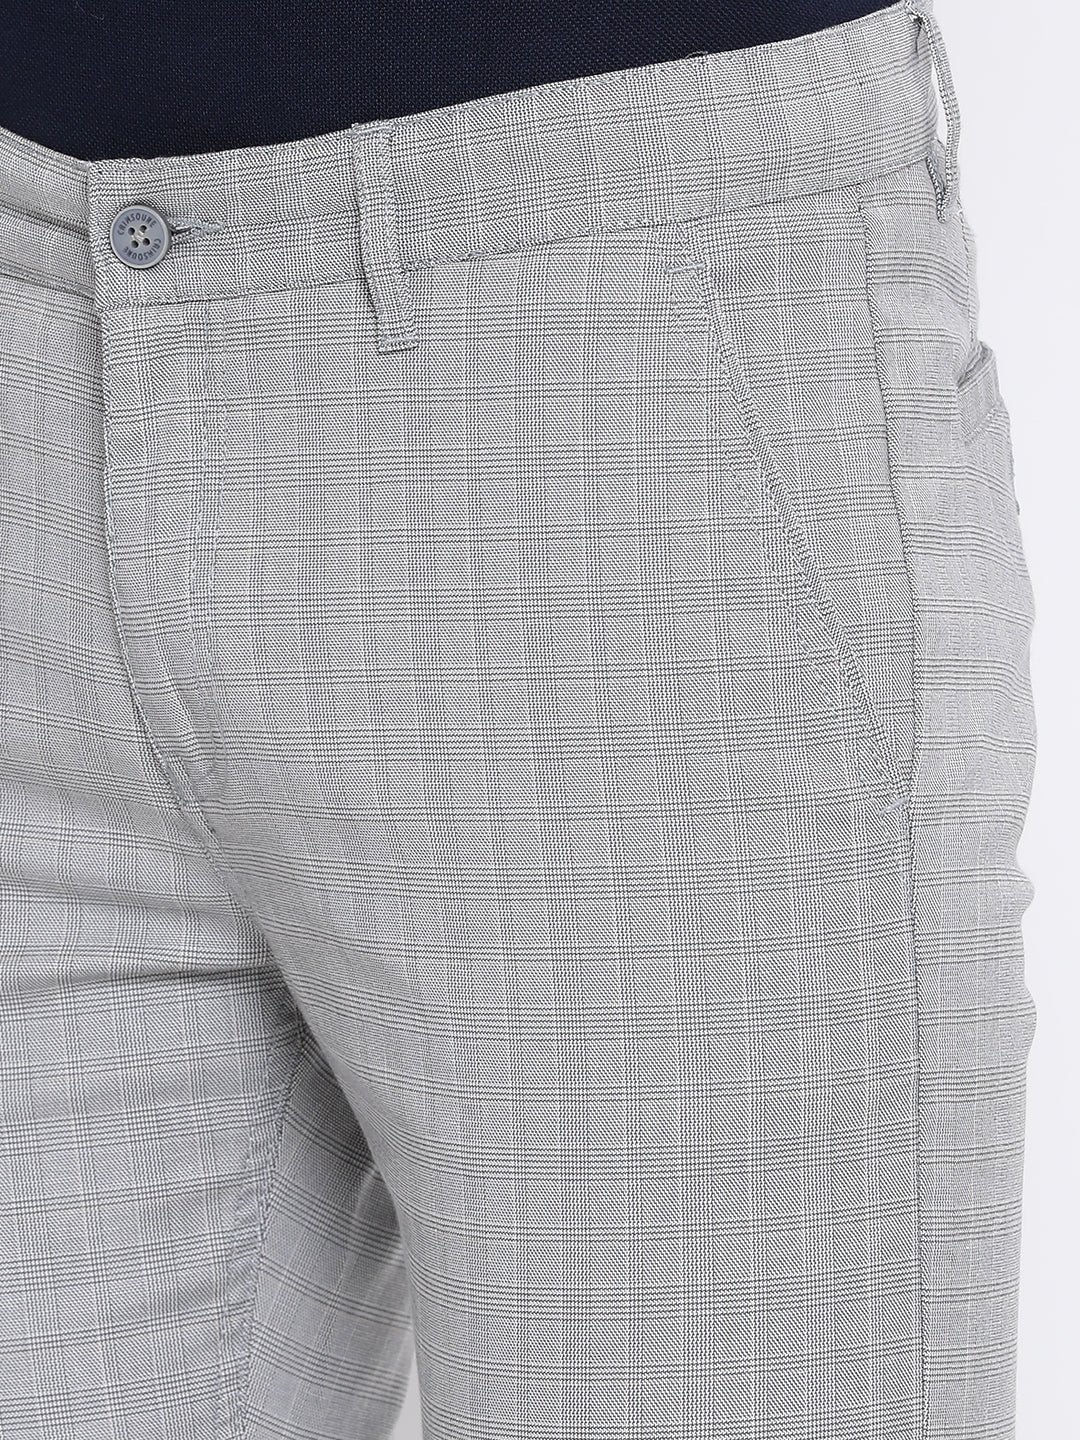 Grey Checked Trousers - Men Trousers